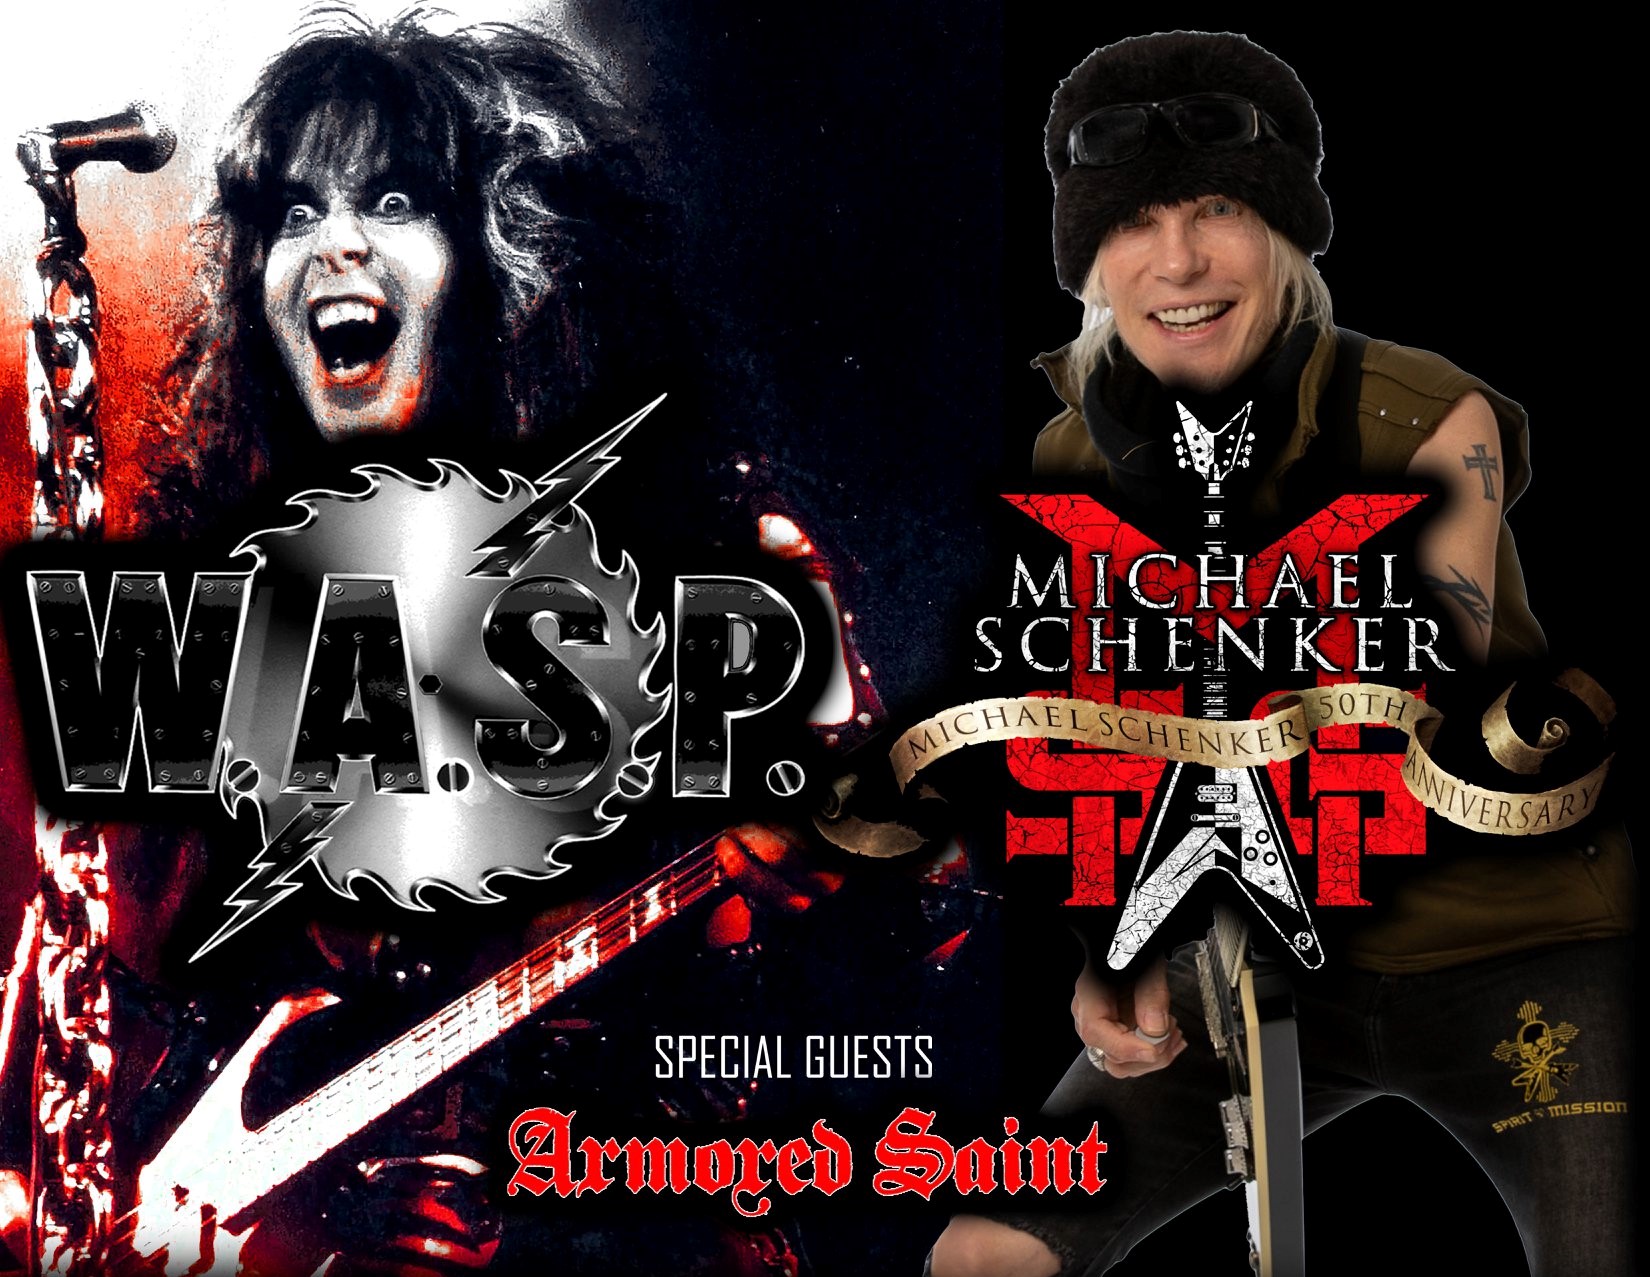 wasp, msg, armored saint pic 1